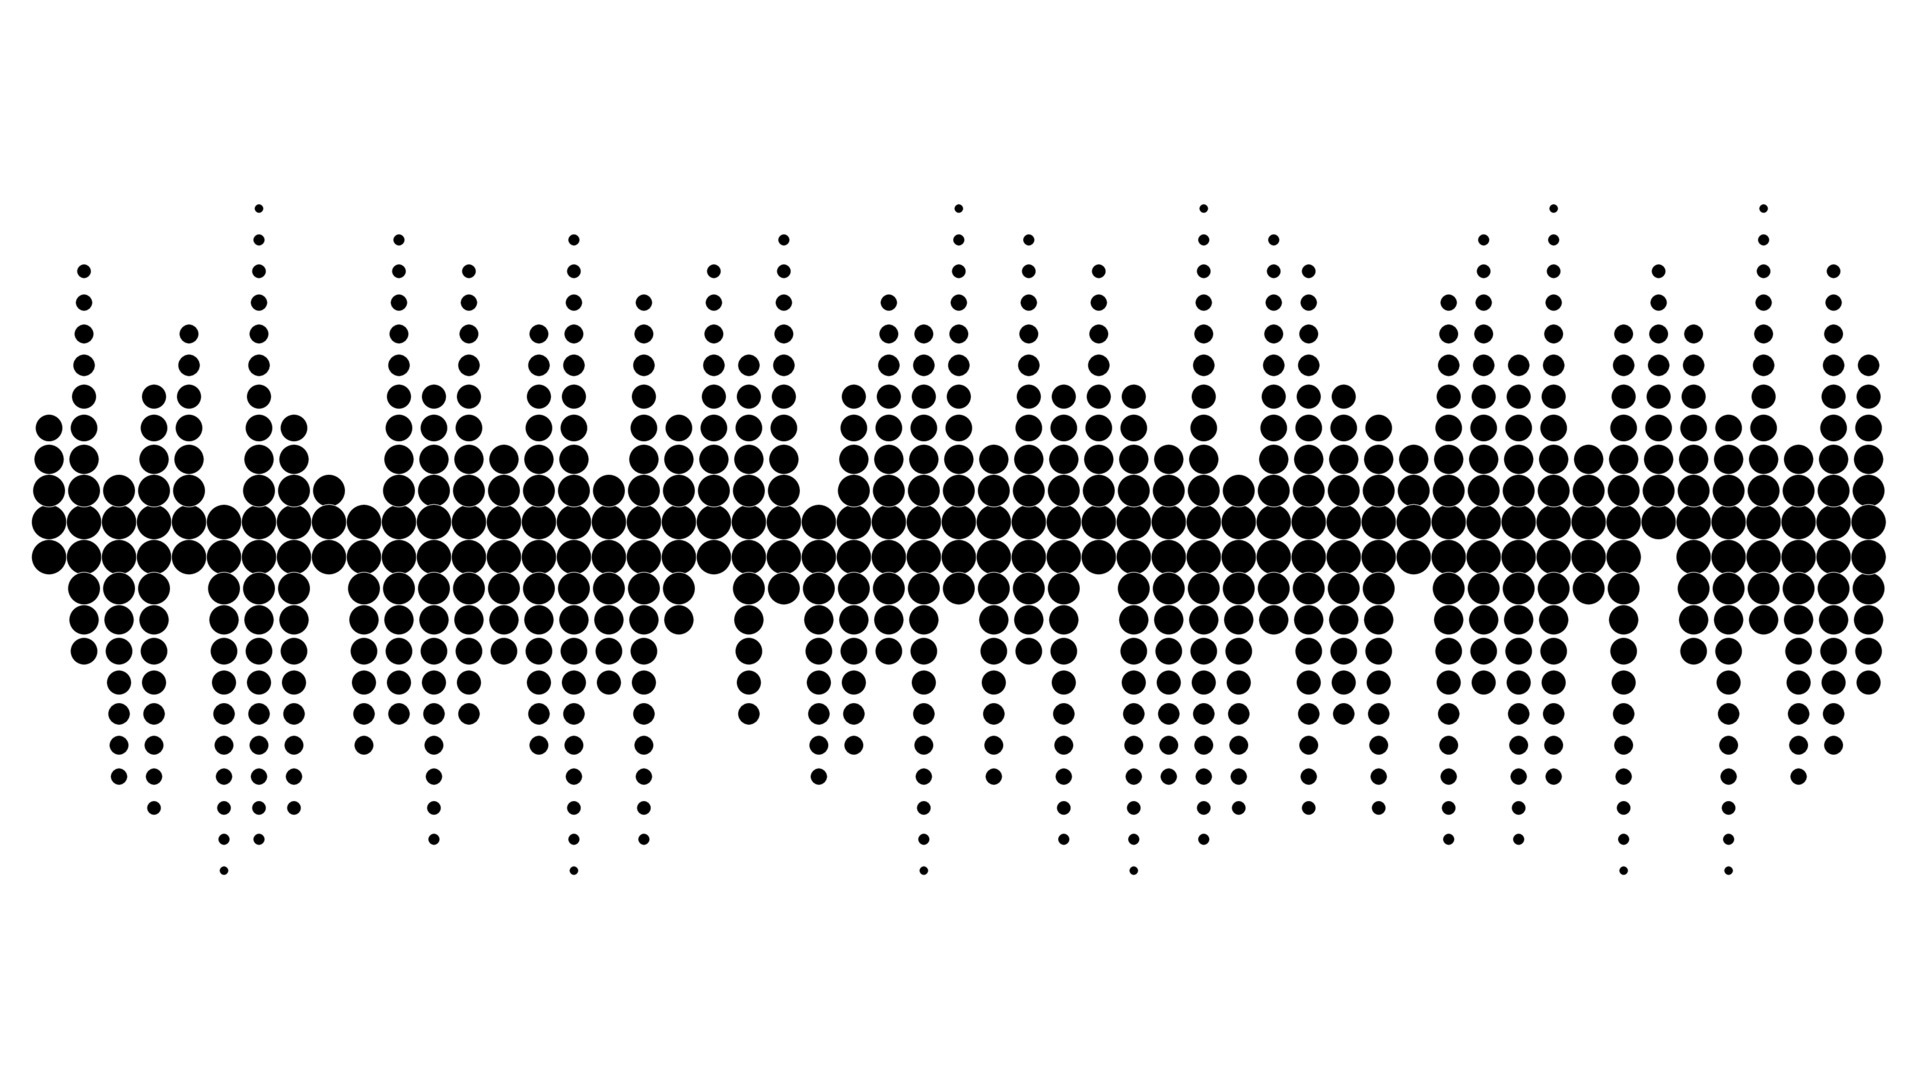 1920x1080 Black circles sound wave wallpaper. Black dotted graphical frequency backgrounds. 5226598 Vector Art